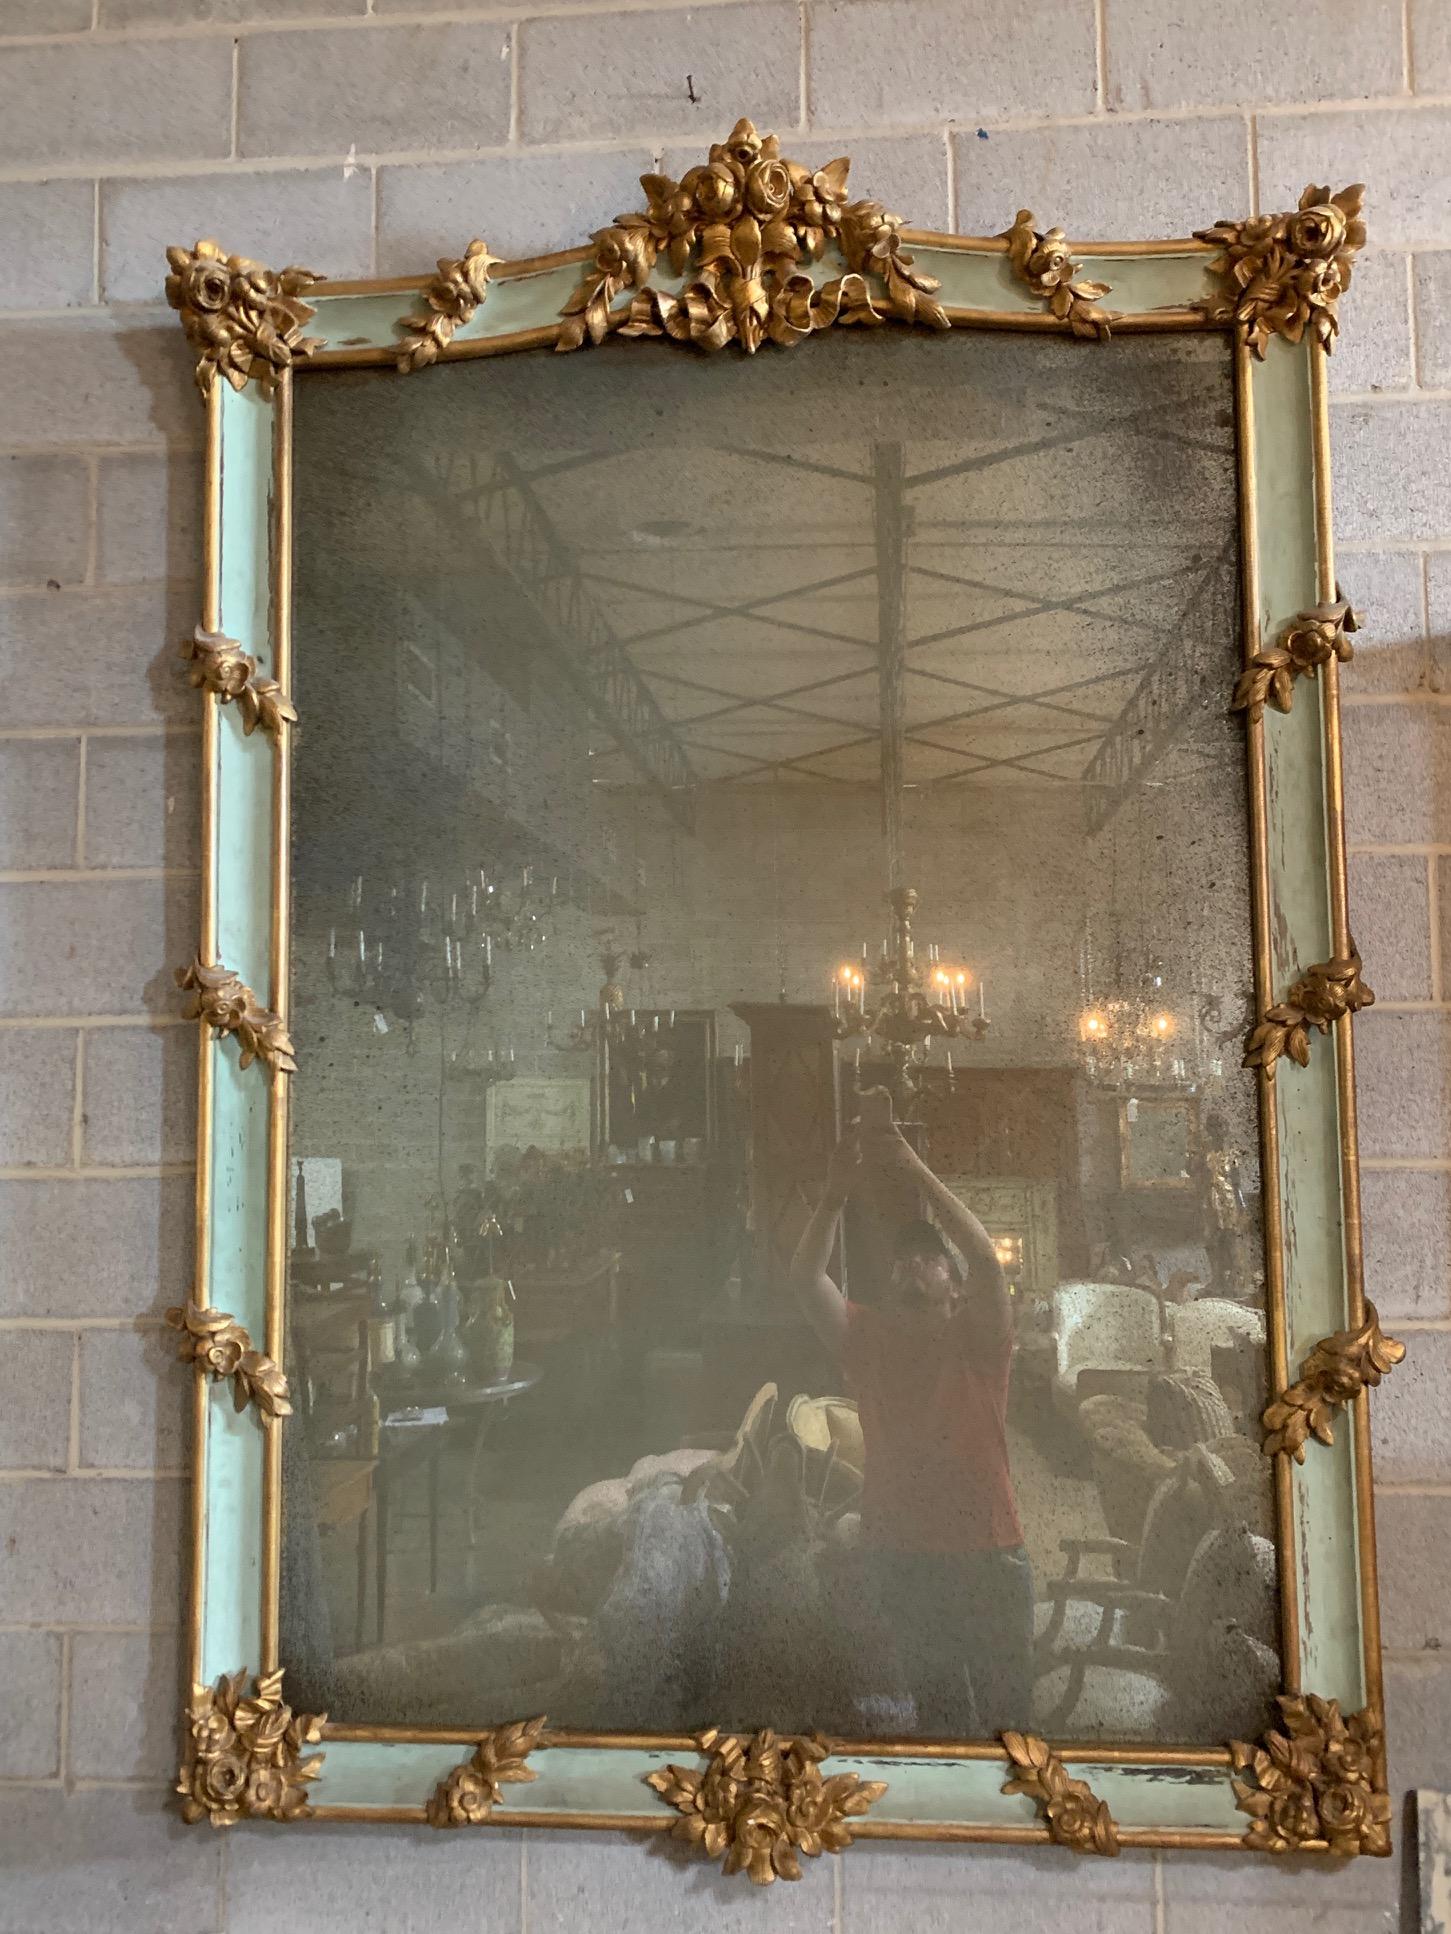 A 19th century French painted and parcel gilt mirror with beautiful elements is realized in carved and giltwood.

The style is Napoleon III, the frame is 19th century with a newer antiqued mirror. The carved wood frame is decorated with high